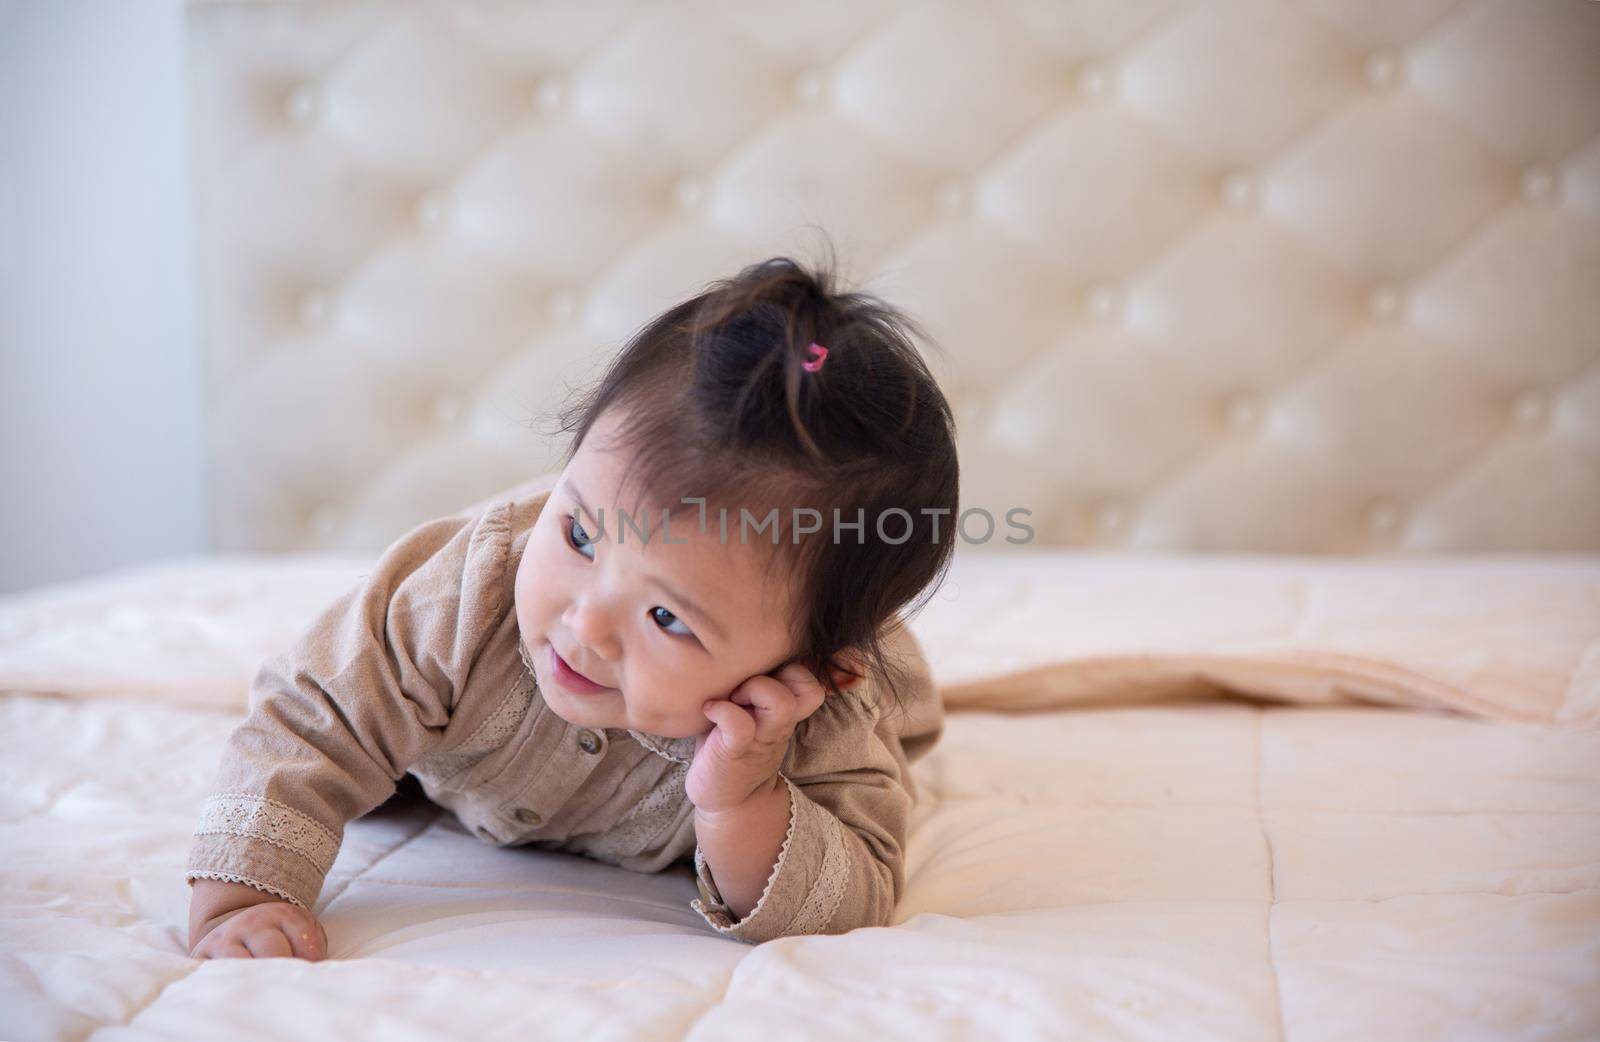 Portrait of a baby girl on the bed in bedroom